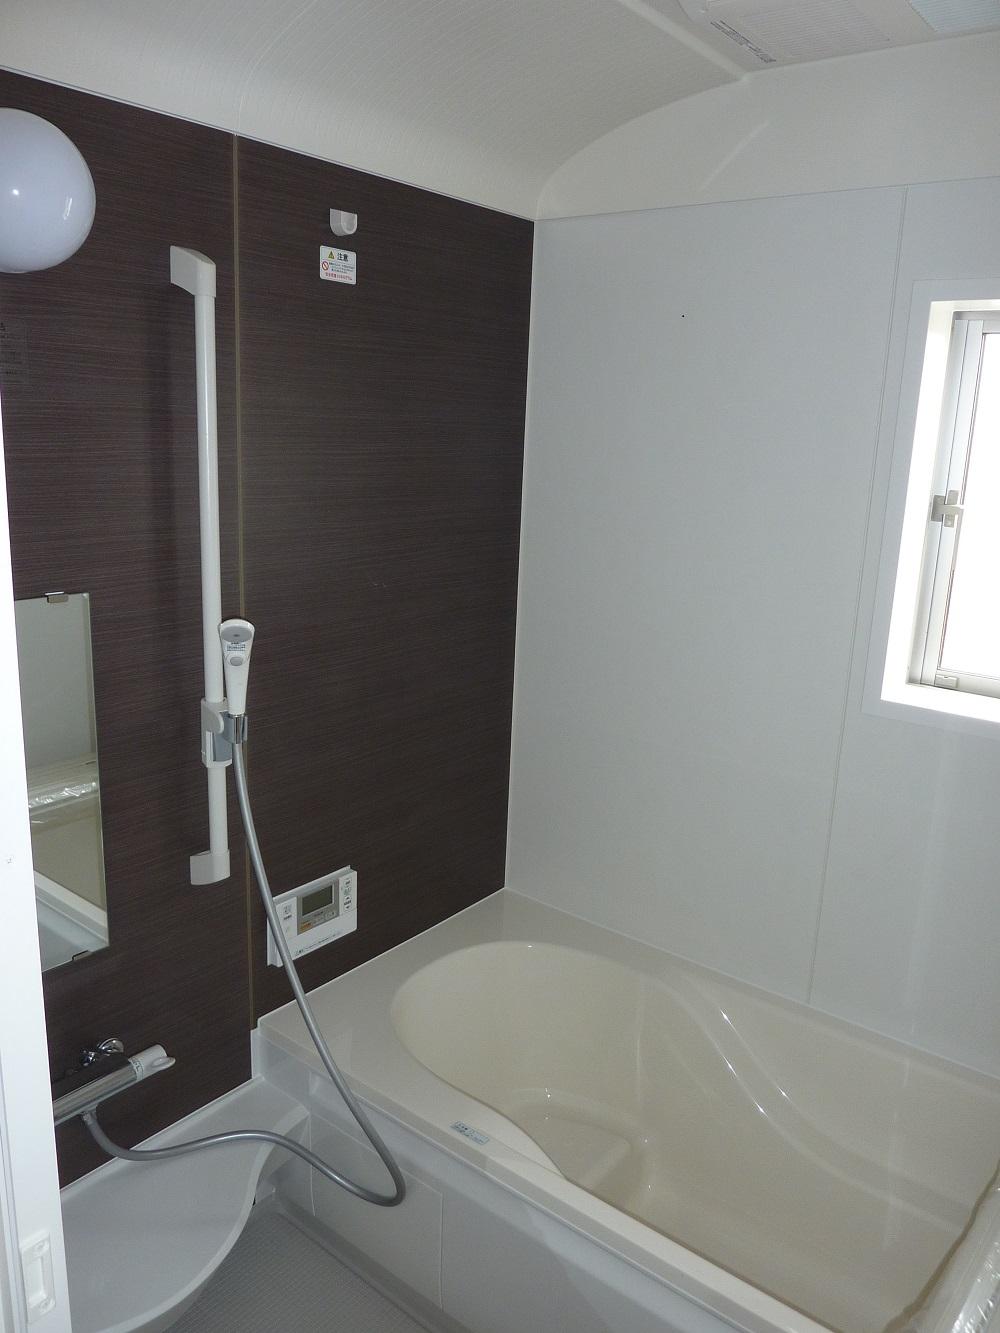 Bathroom. Same specifications is a picture! 